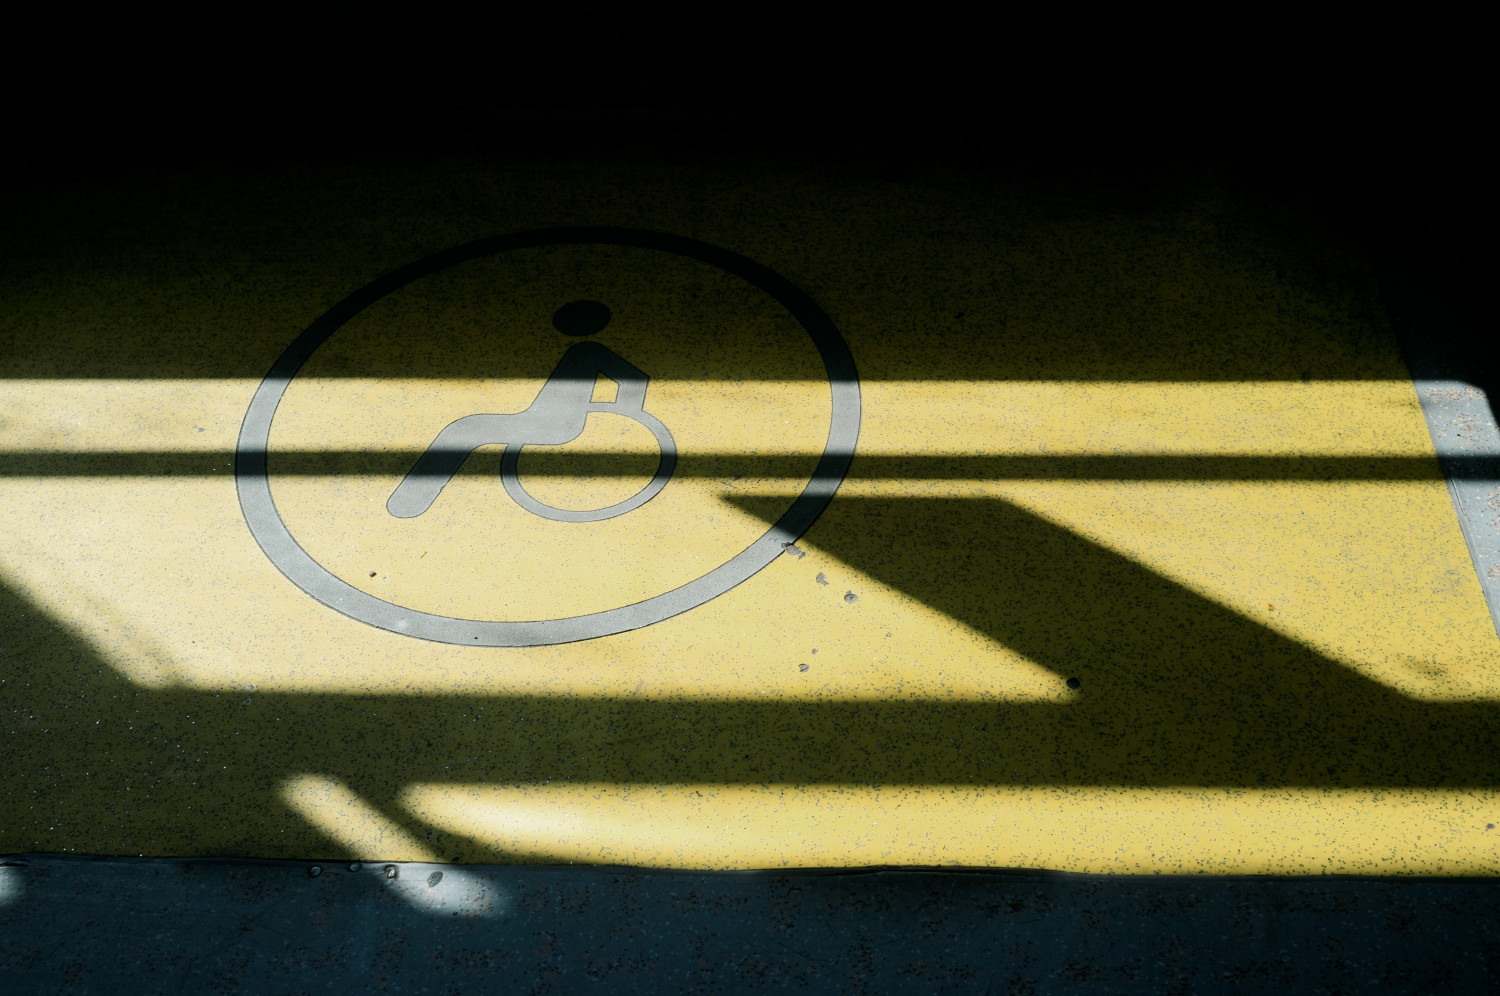 Image of a sun-lit concrete floor with a bright yellow painted disability symbol